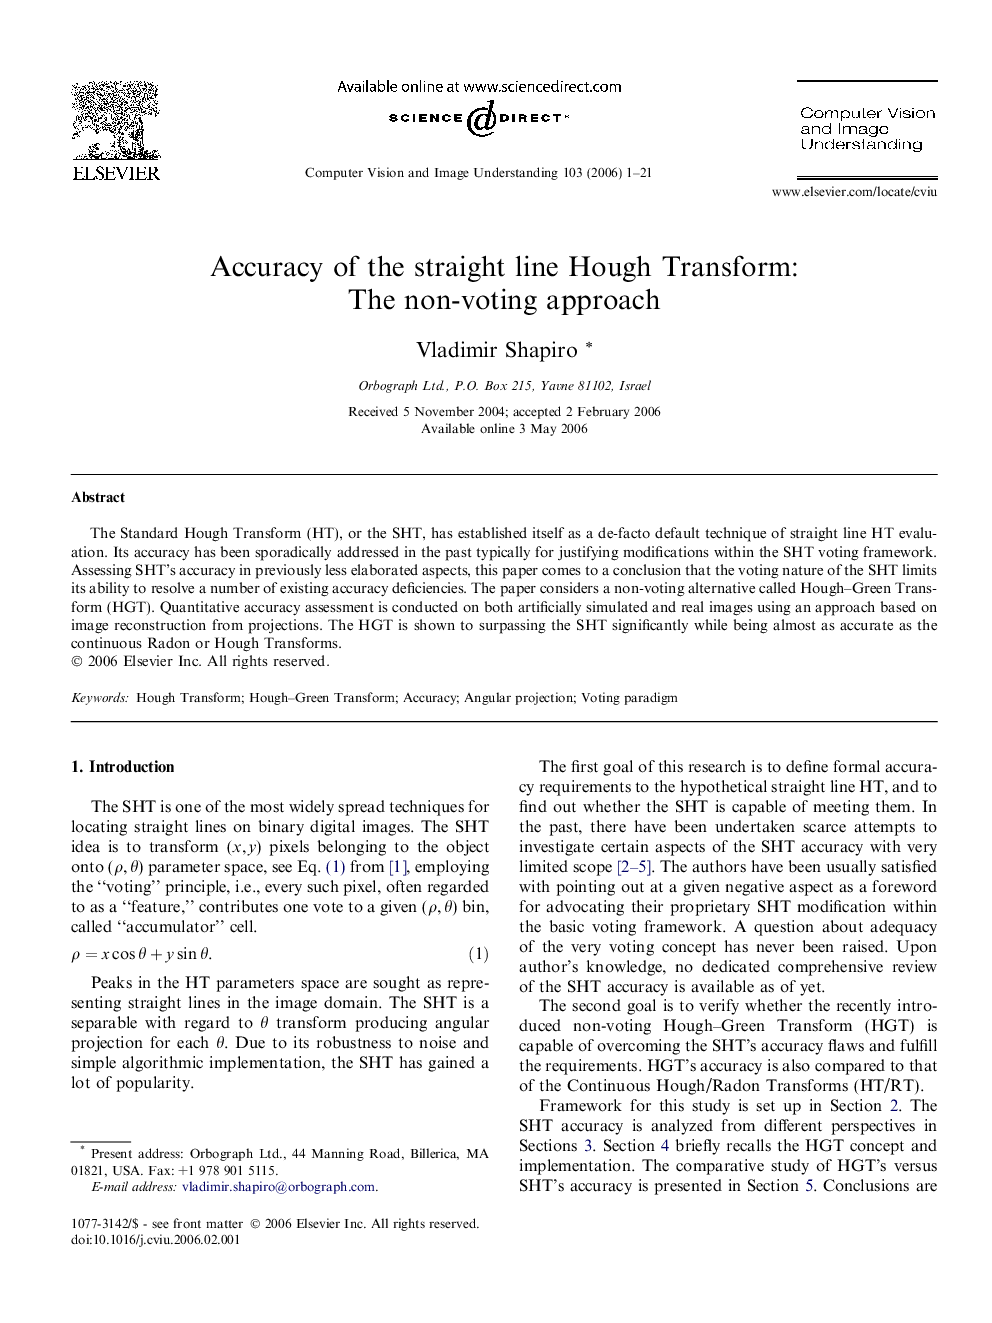 Accuracy of the straight line Hough Transform: The non-voting approach